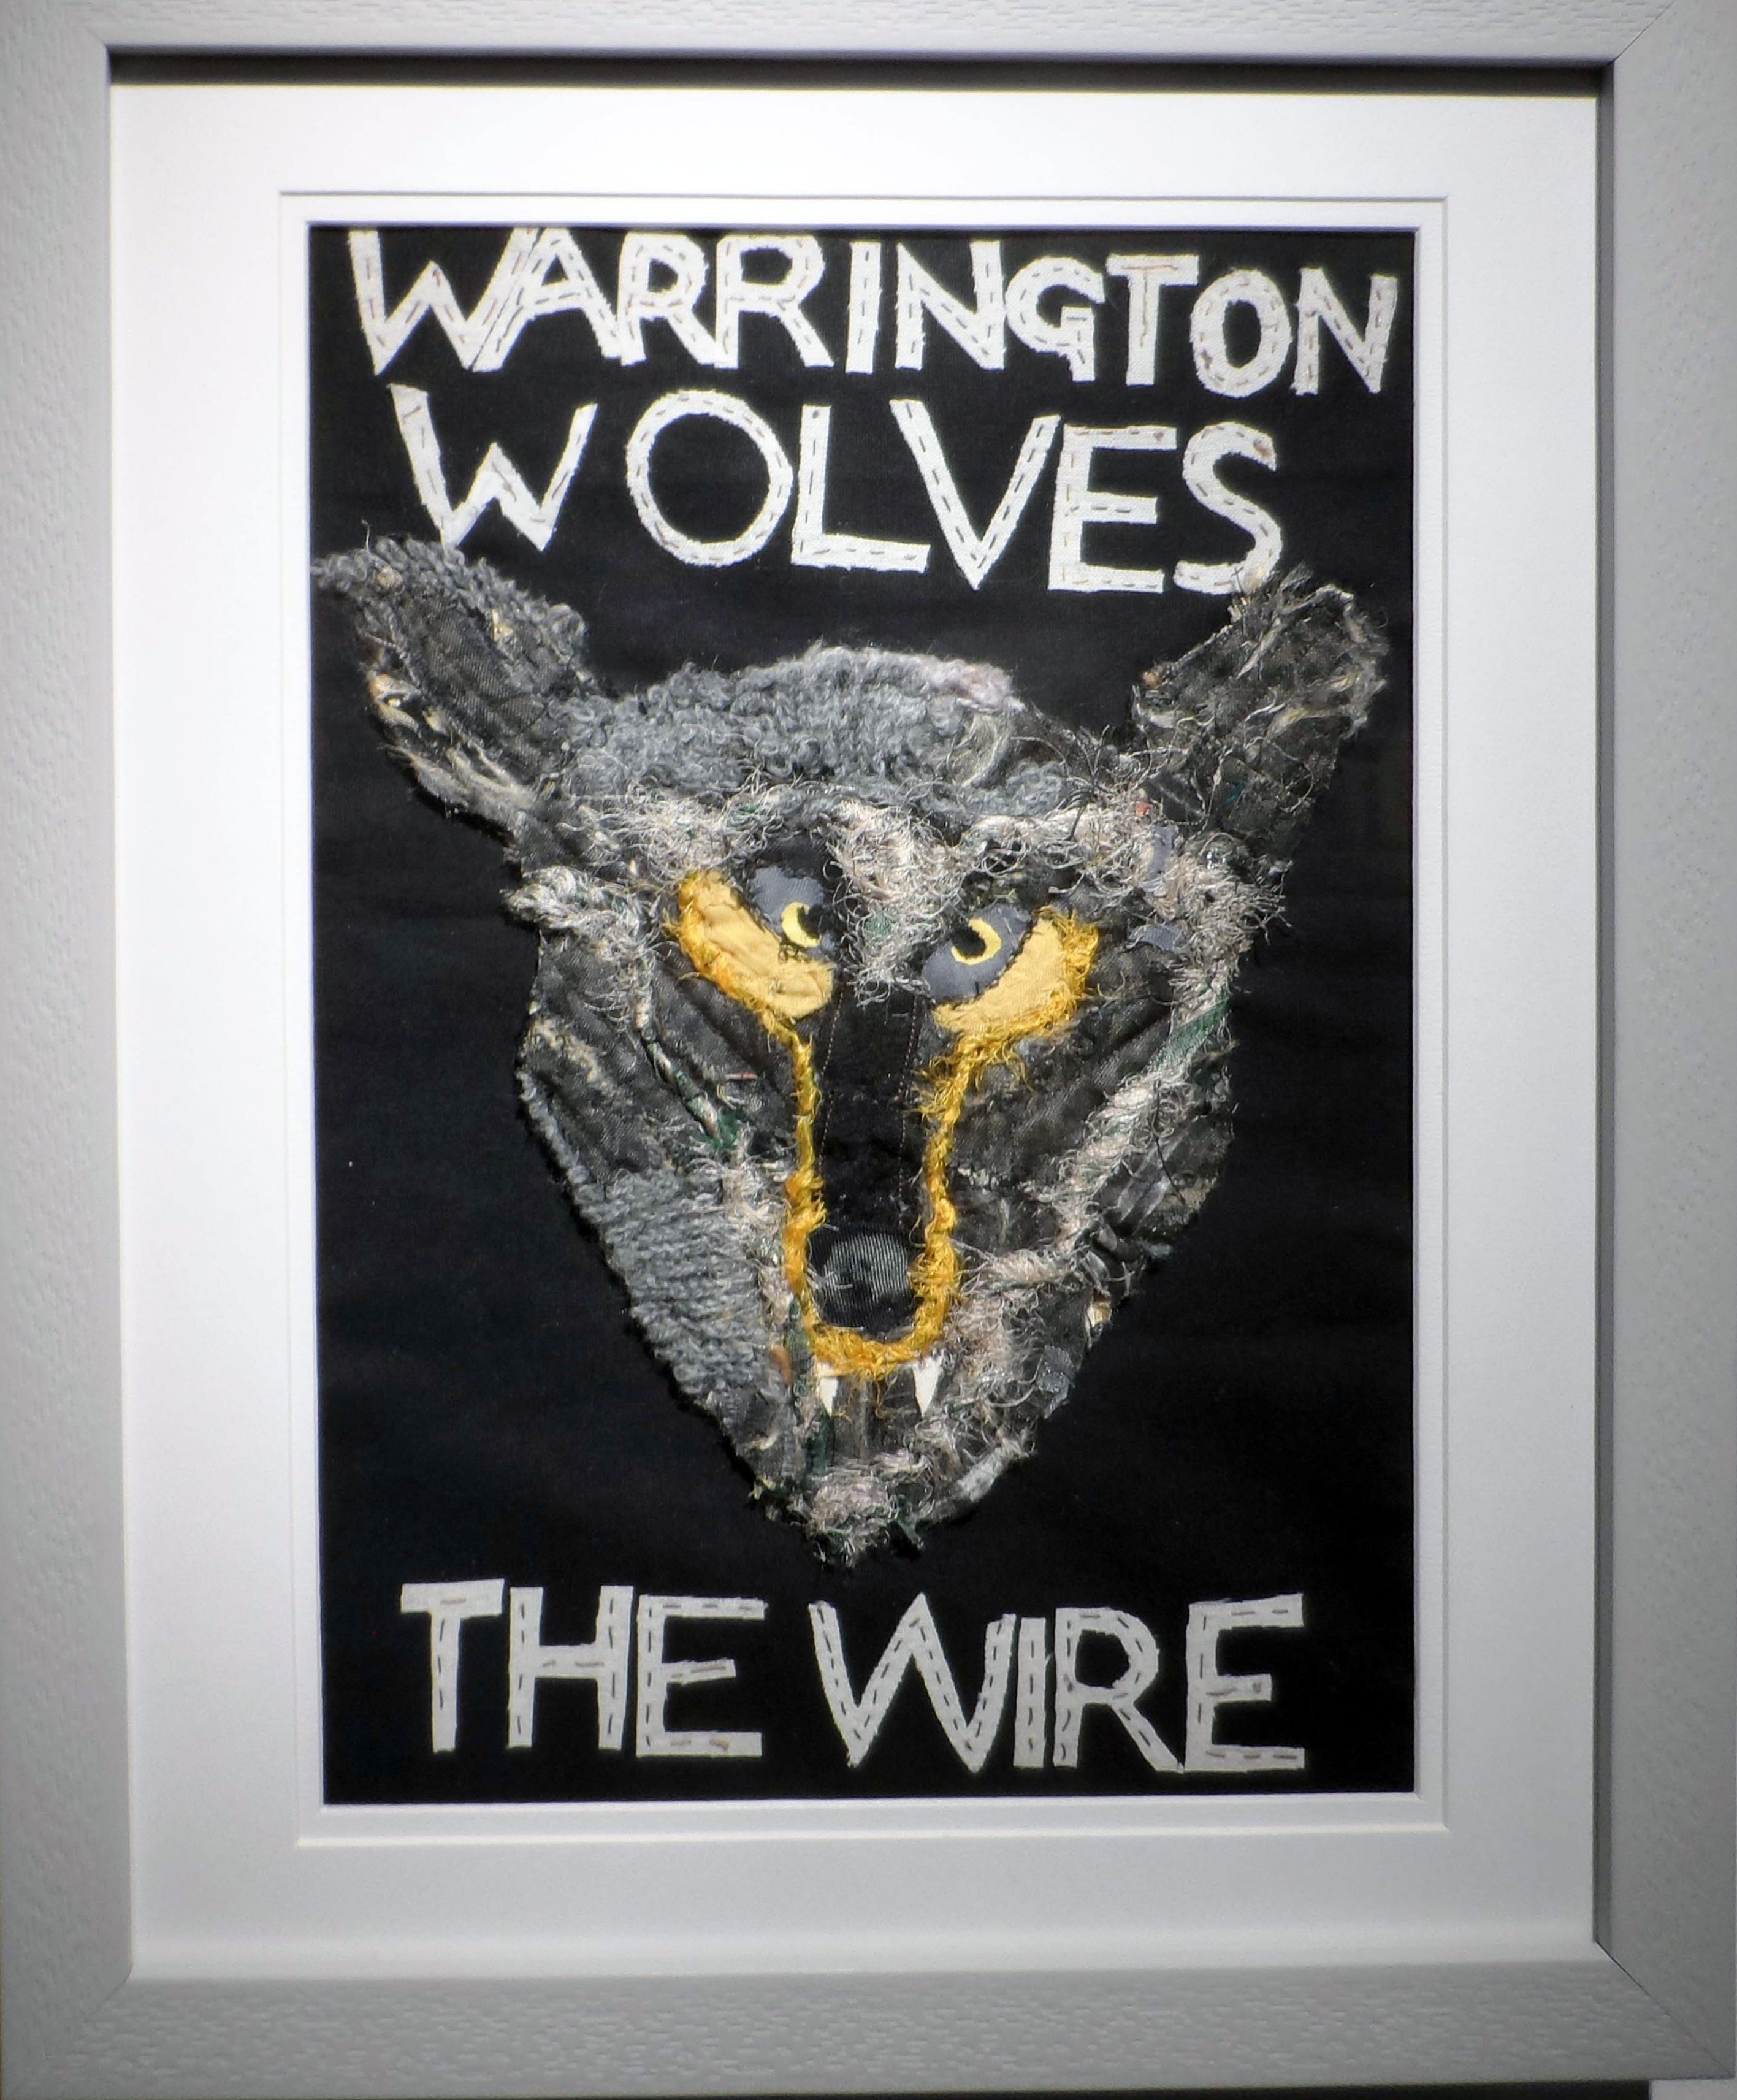 WIRE WOLVES - WARRINGTON WOLVES HANDBALL - THE WIRE by Joyce Osuji, applique